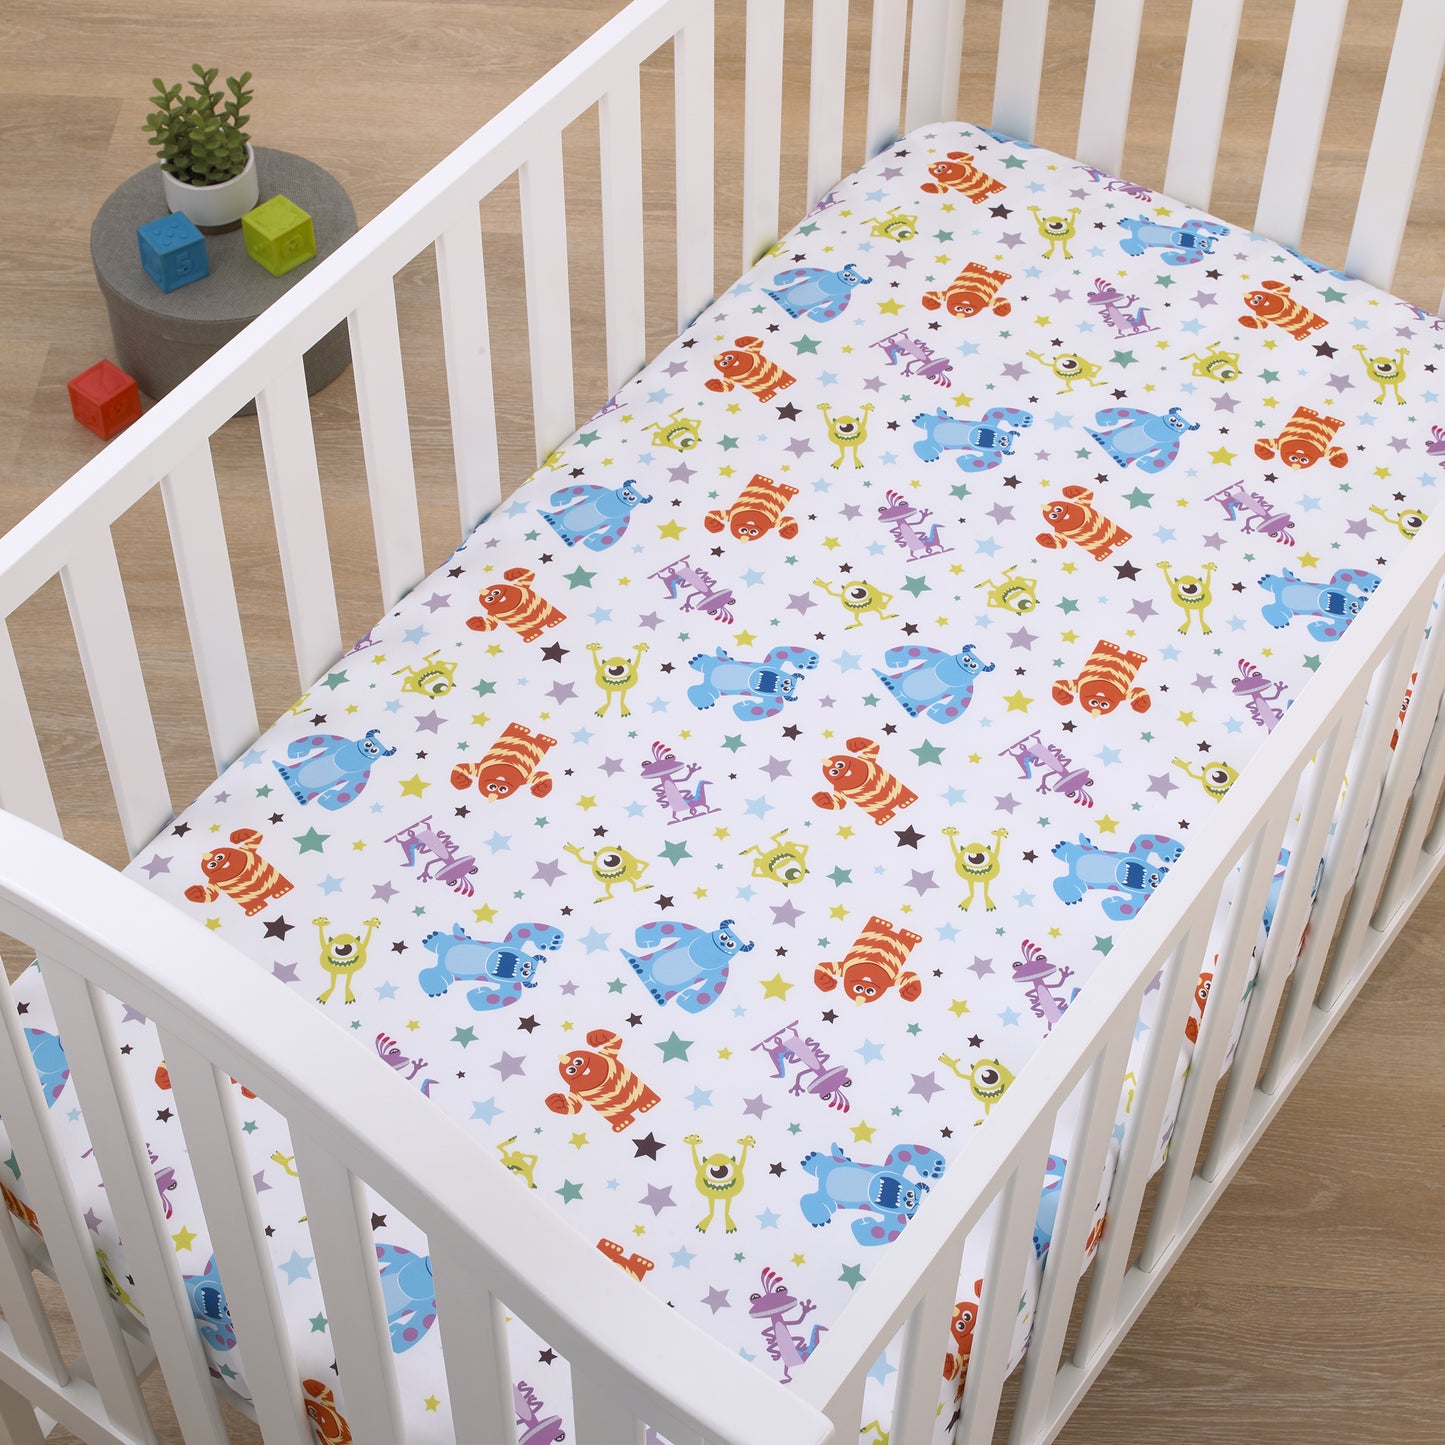 Disney Monsters Inc. Blue, Green, Orange and White, Sully and Mike Super Soft Nursery Fitted Crib Sheet